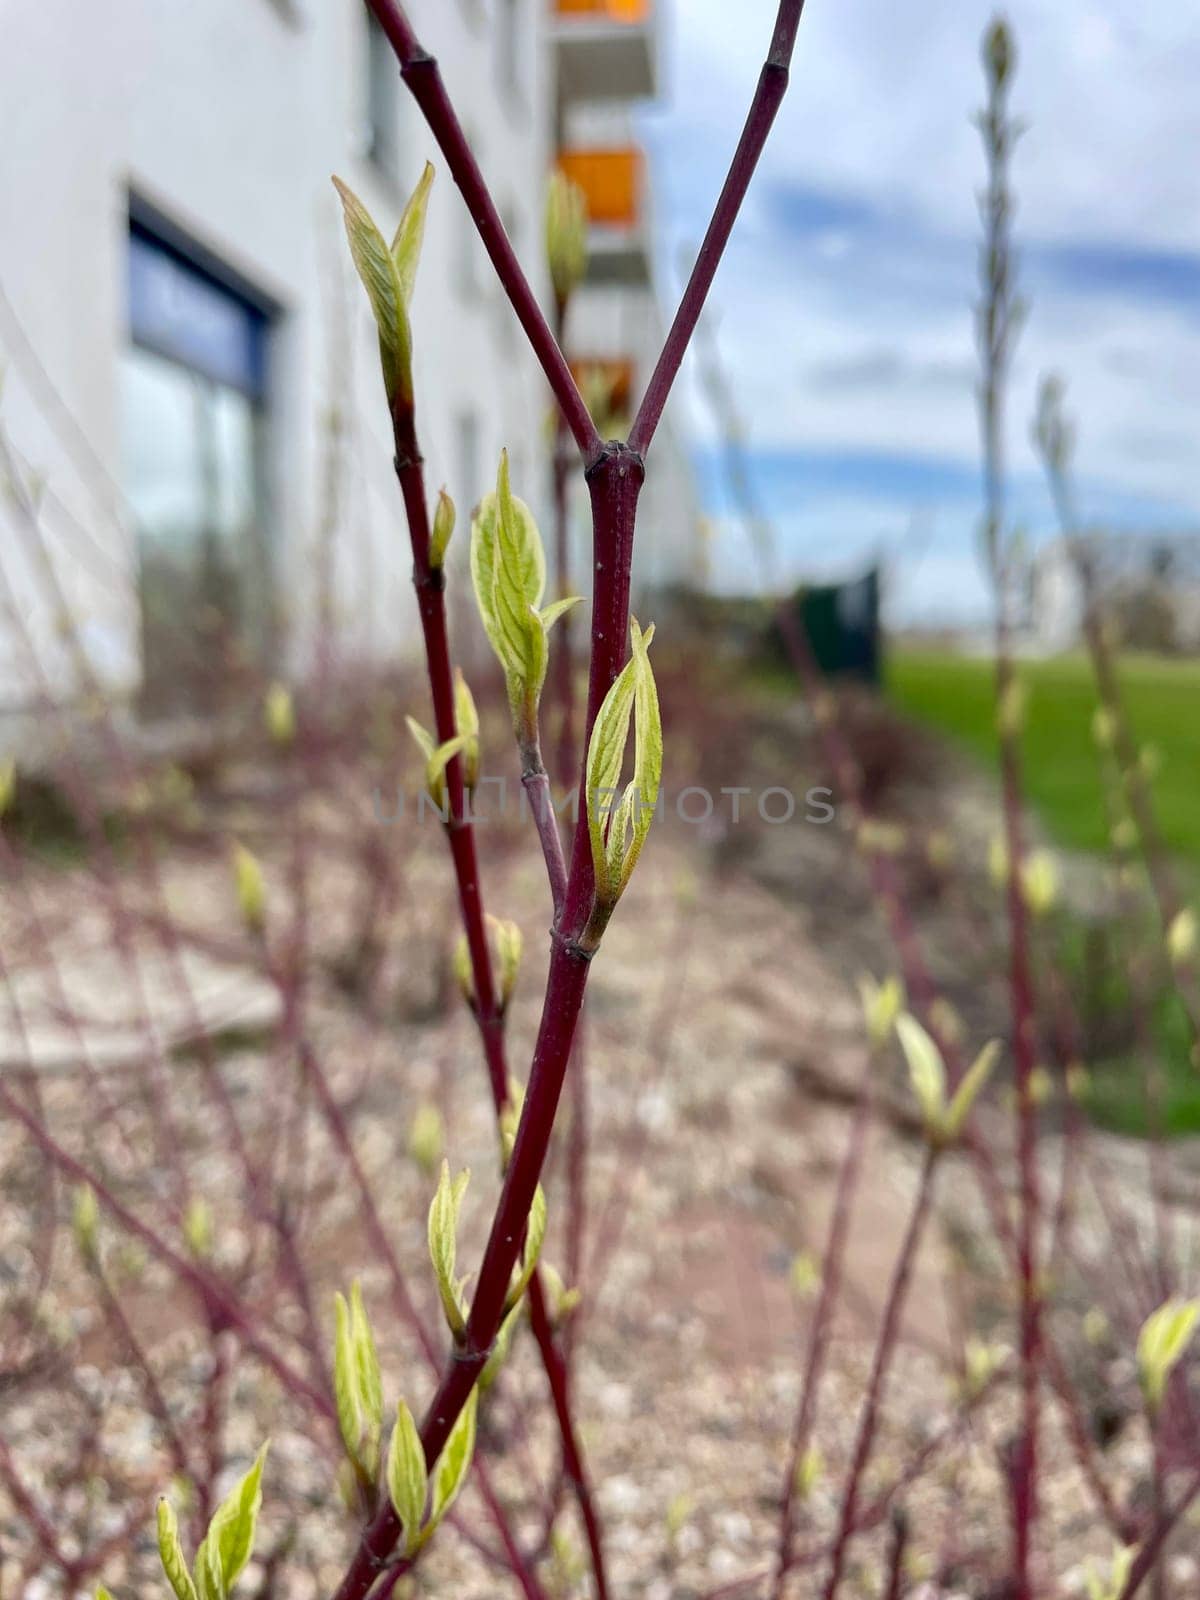 Leaf buds bloom on the twigs of bushes in early spring. High quality photo